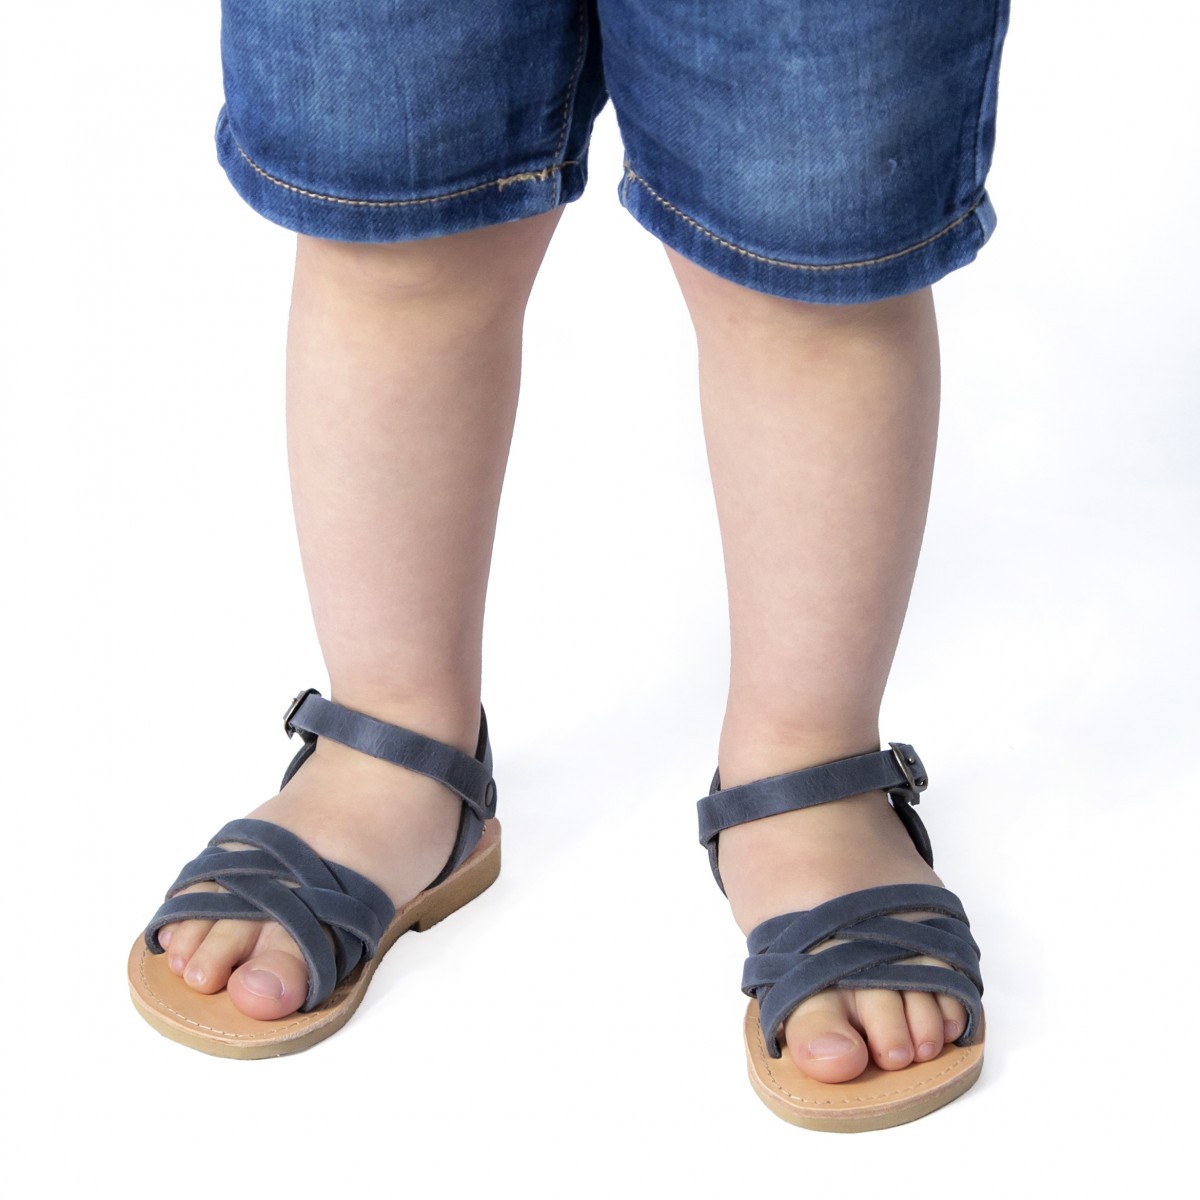 Child's gladiator braided sandals in blue nubuck leather with buckle ...